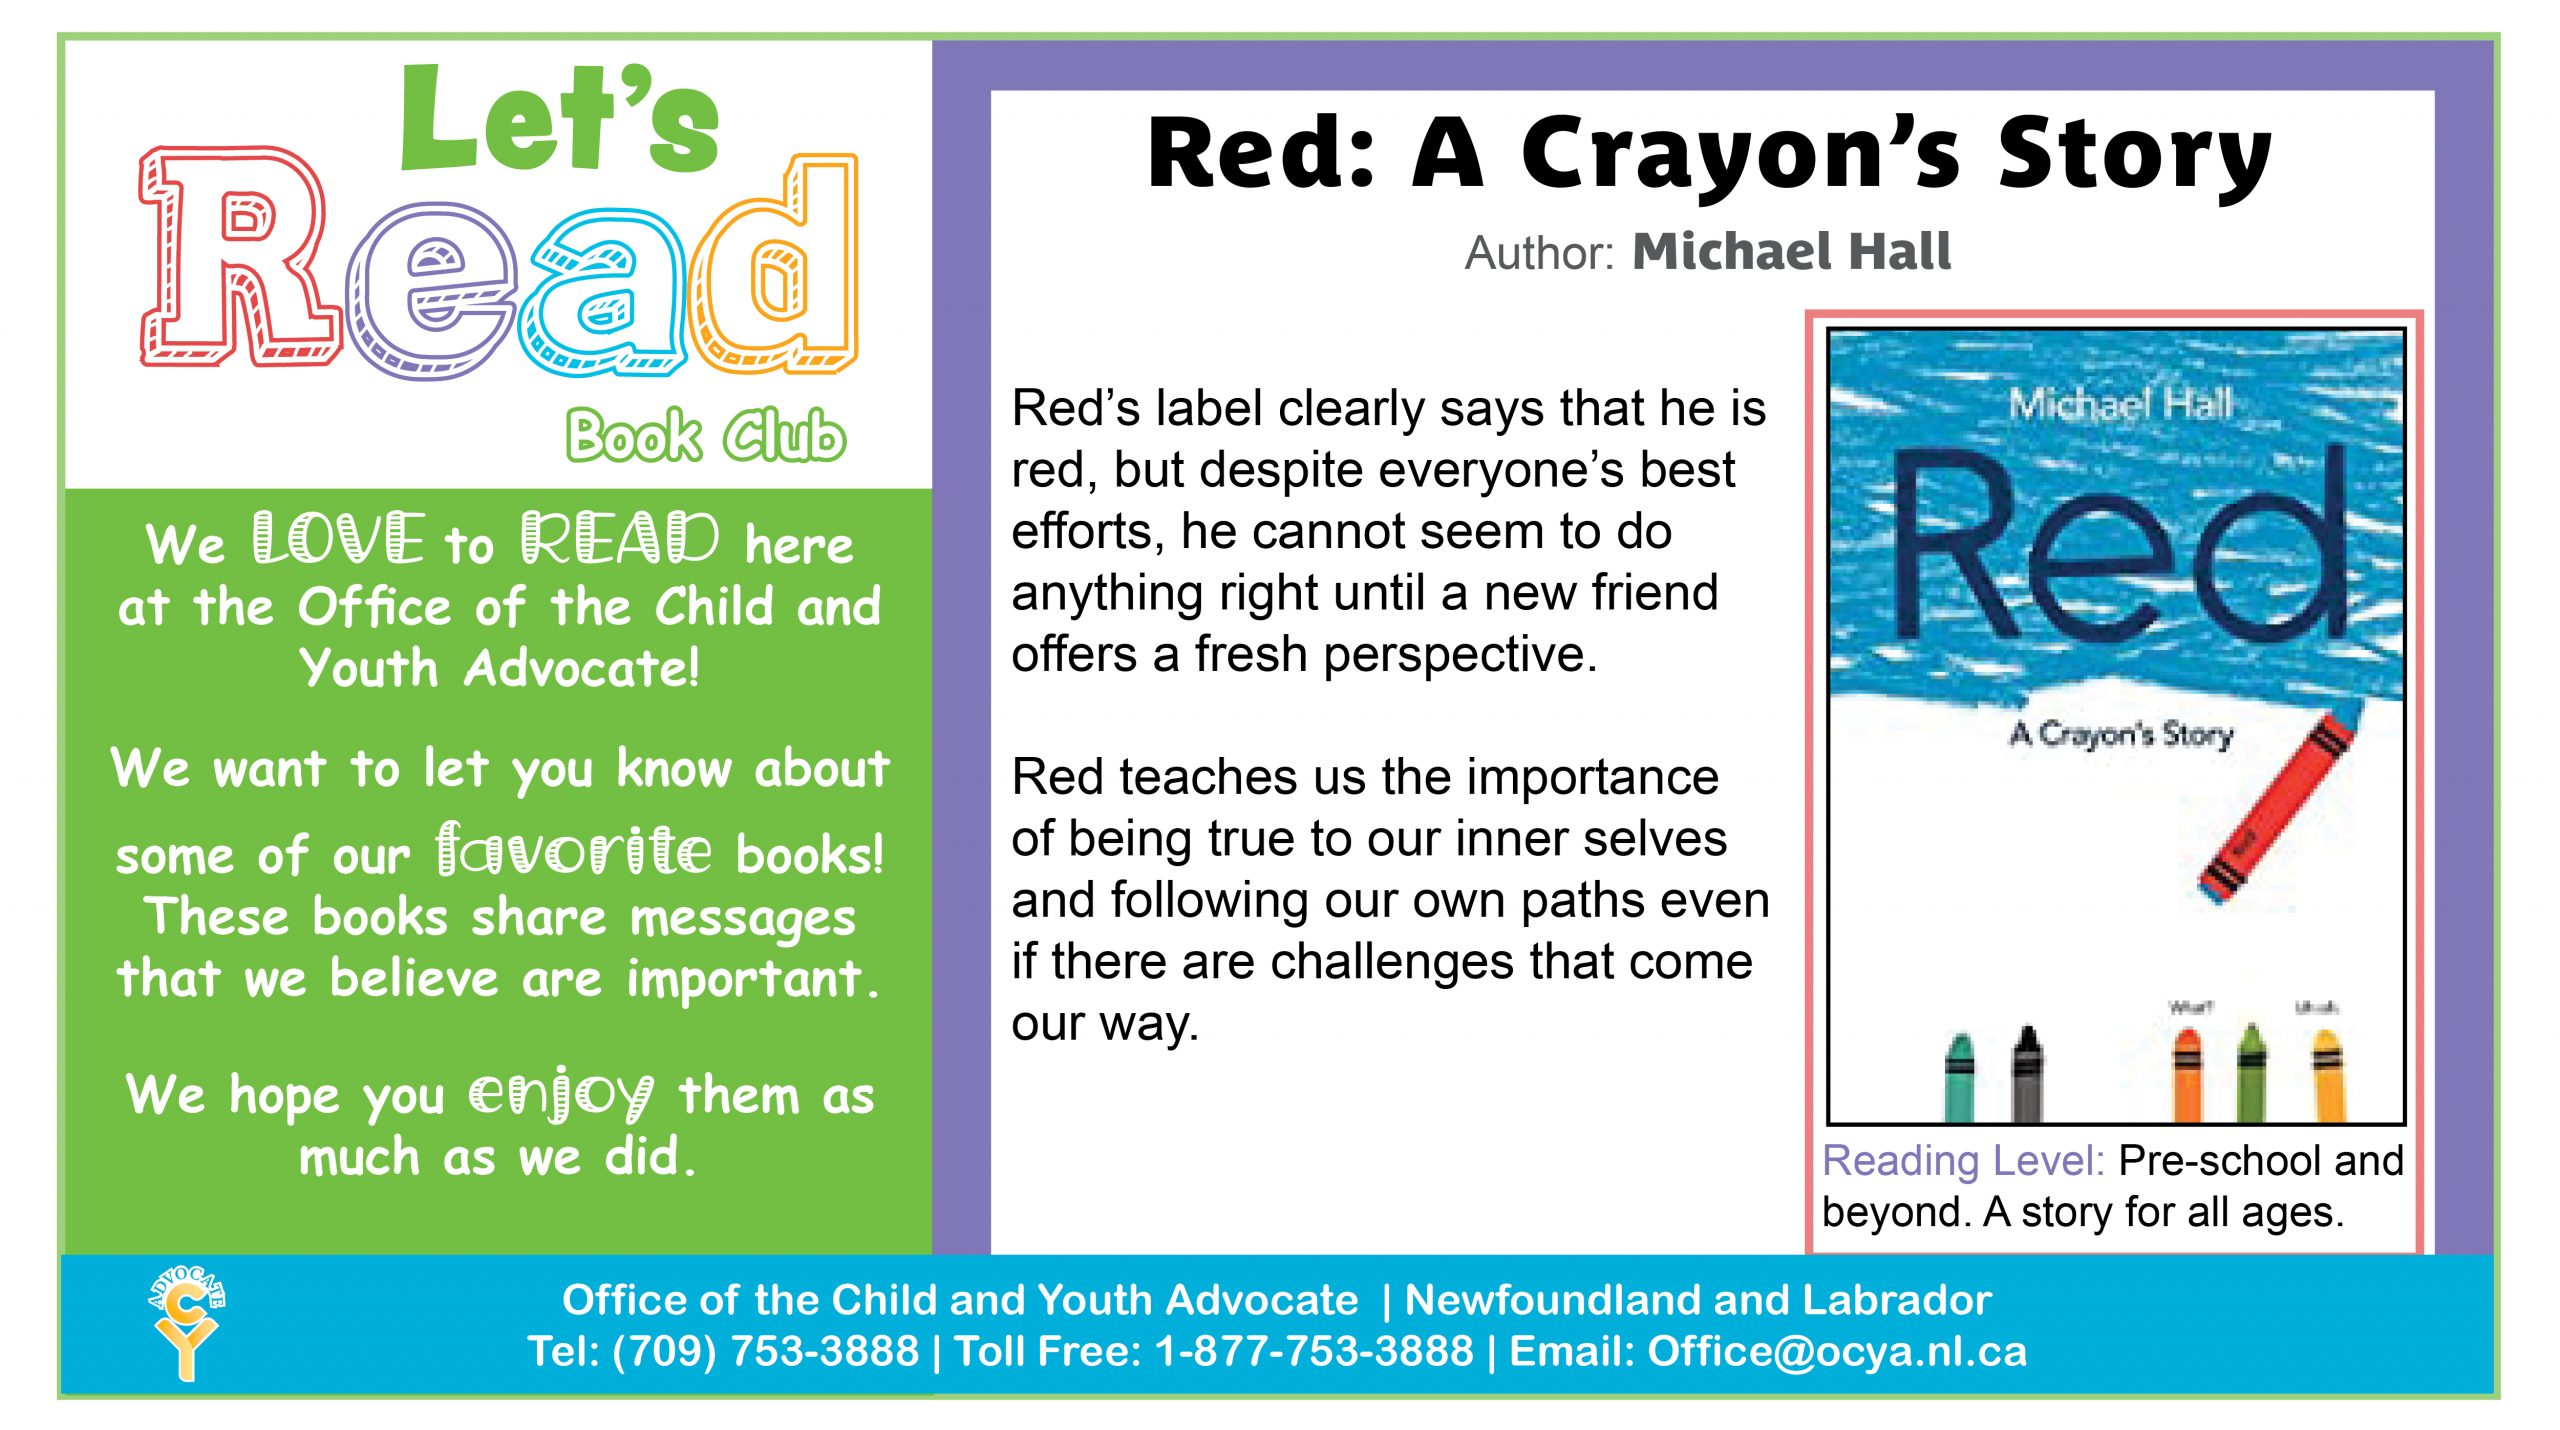 Red: A Crayon's Story, by Michael Hall. Red's label clearly says that he is red, but despite everyone's best efforts, he cannot seem to do anything right until a new friend offers a fresh perspective. Red teaches us the importance of being true to our inner selves and following our own paths even if there are challenges that come our way. Reading Level: Pre-school and beyond. A story for all ages.